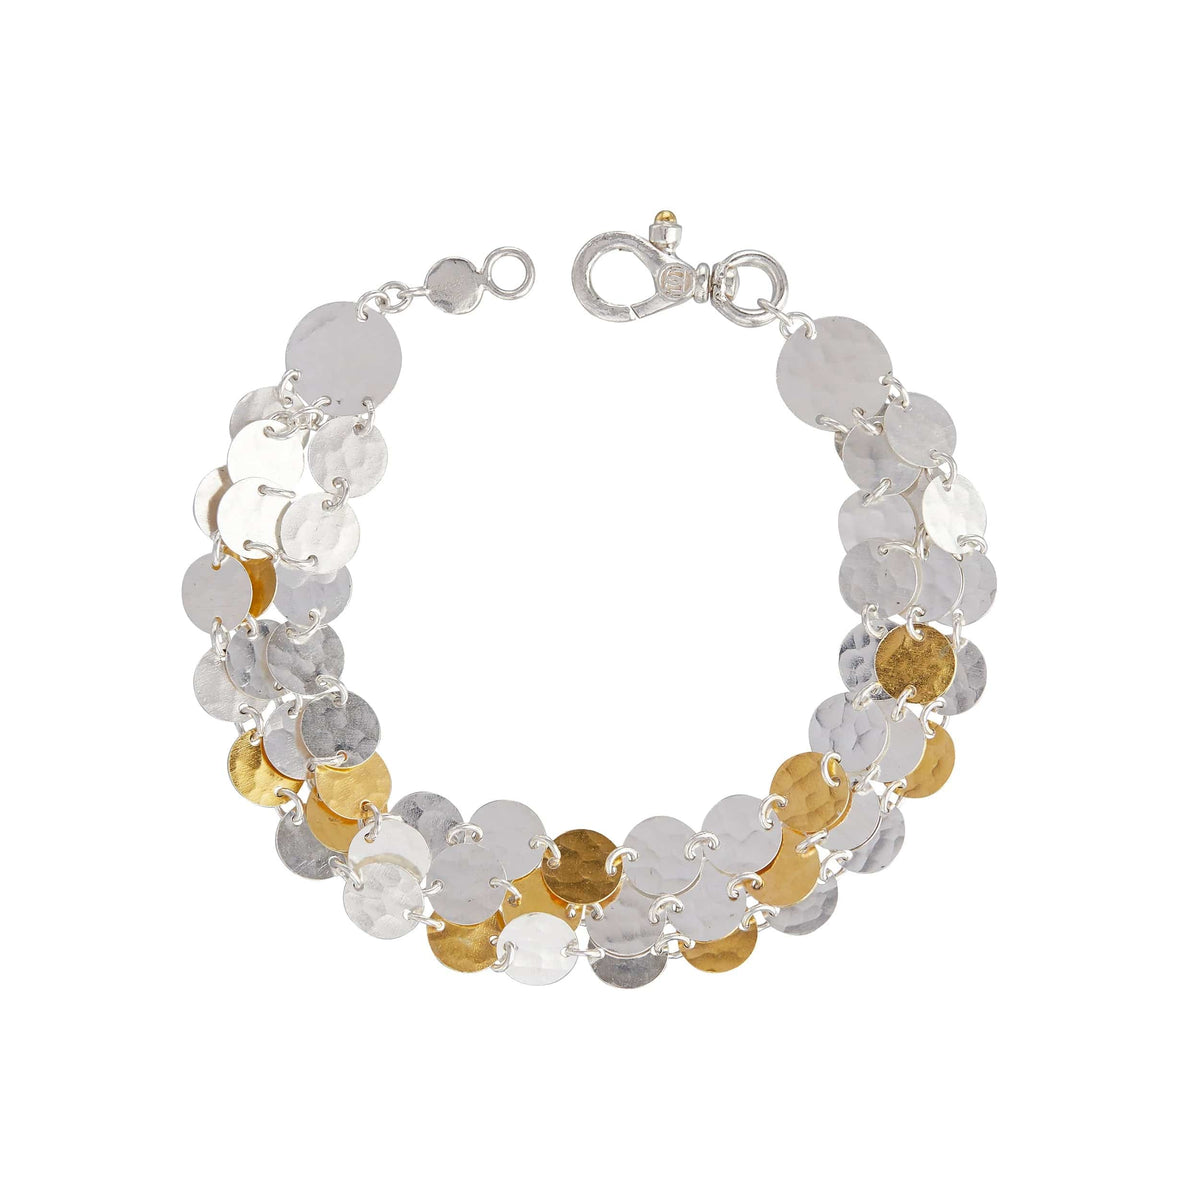 Sterling Silver and 24K Yellow Gold Triple Strand Lush Bracelet, Long's Jewelers